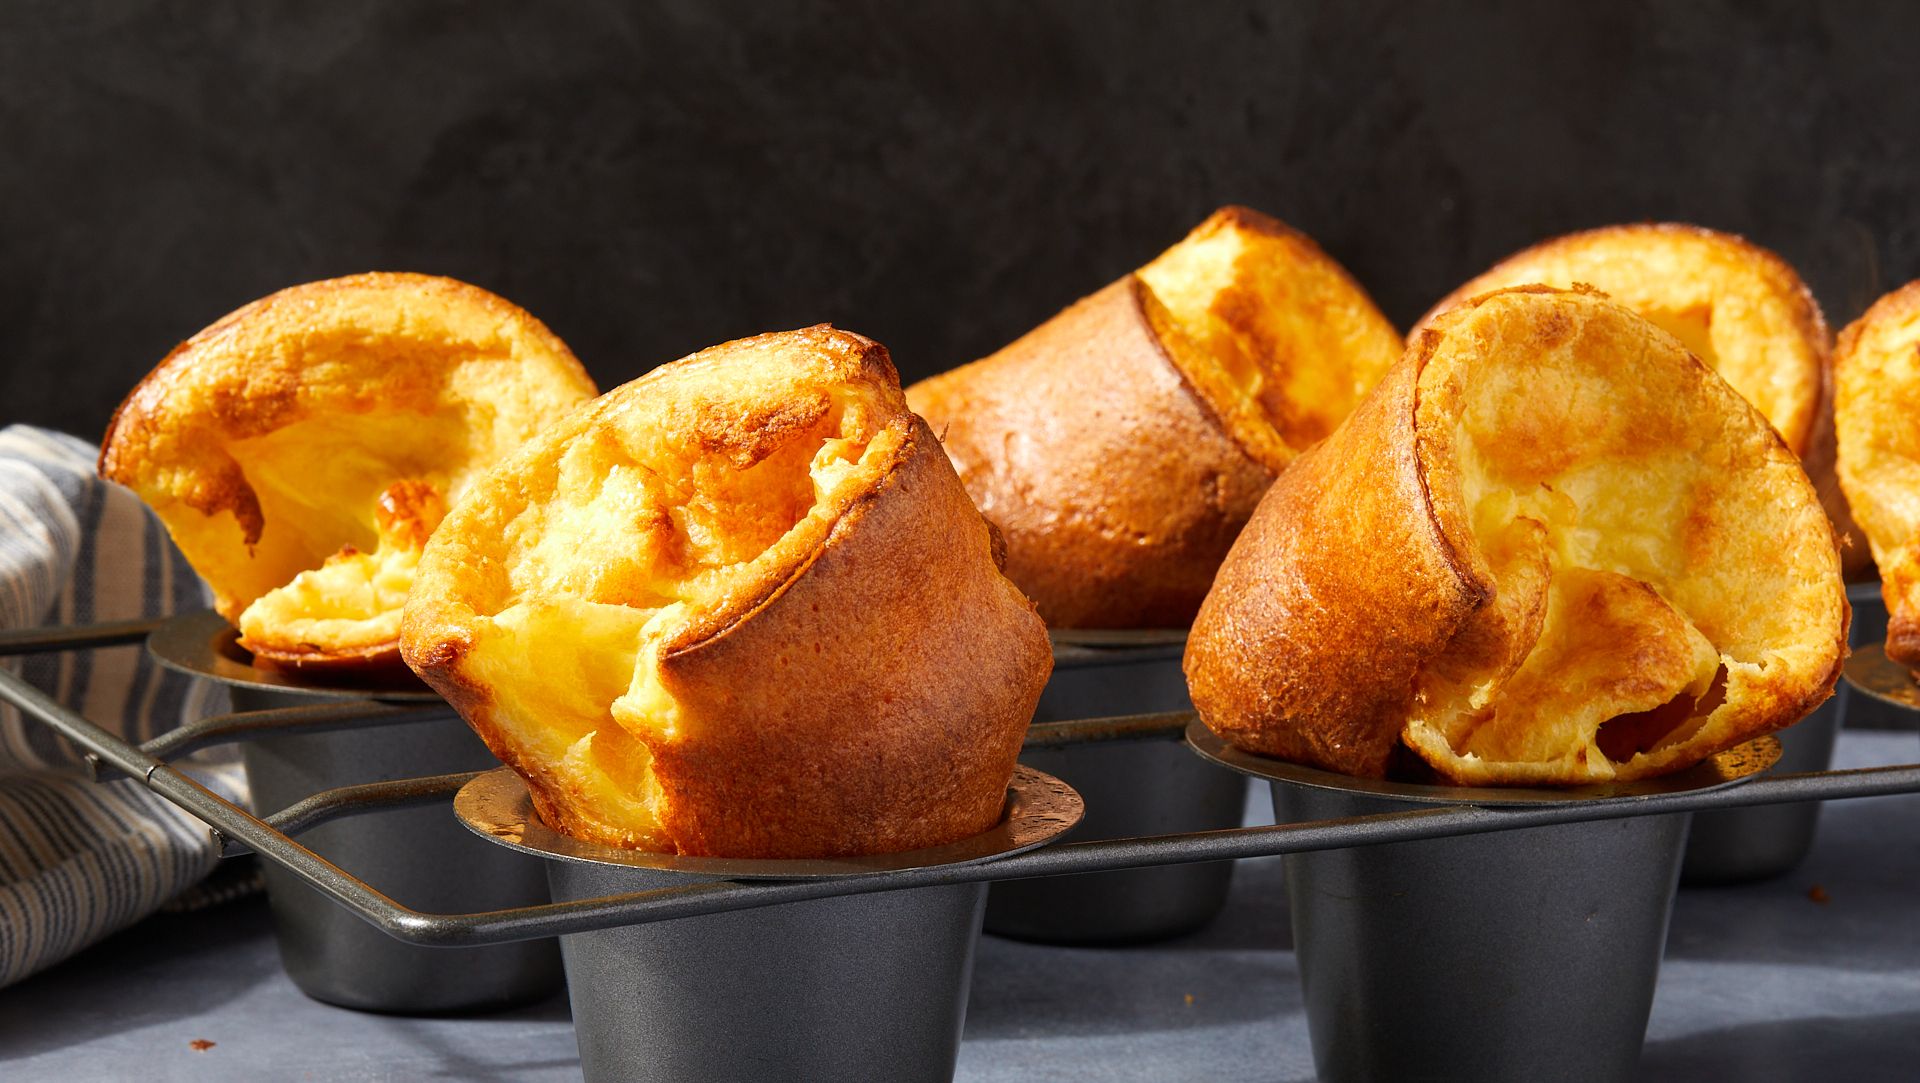 https://hips.hearstapps.com/hmg-prod/images/yorkshire-pudding1-1667499266.jpg?crop=1.00xw:0.846xh;0,0.0636xh